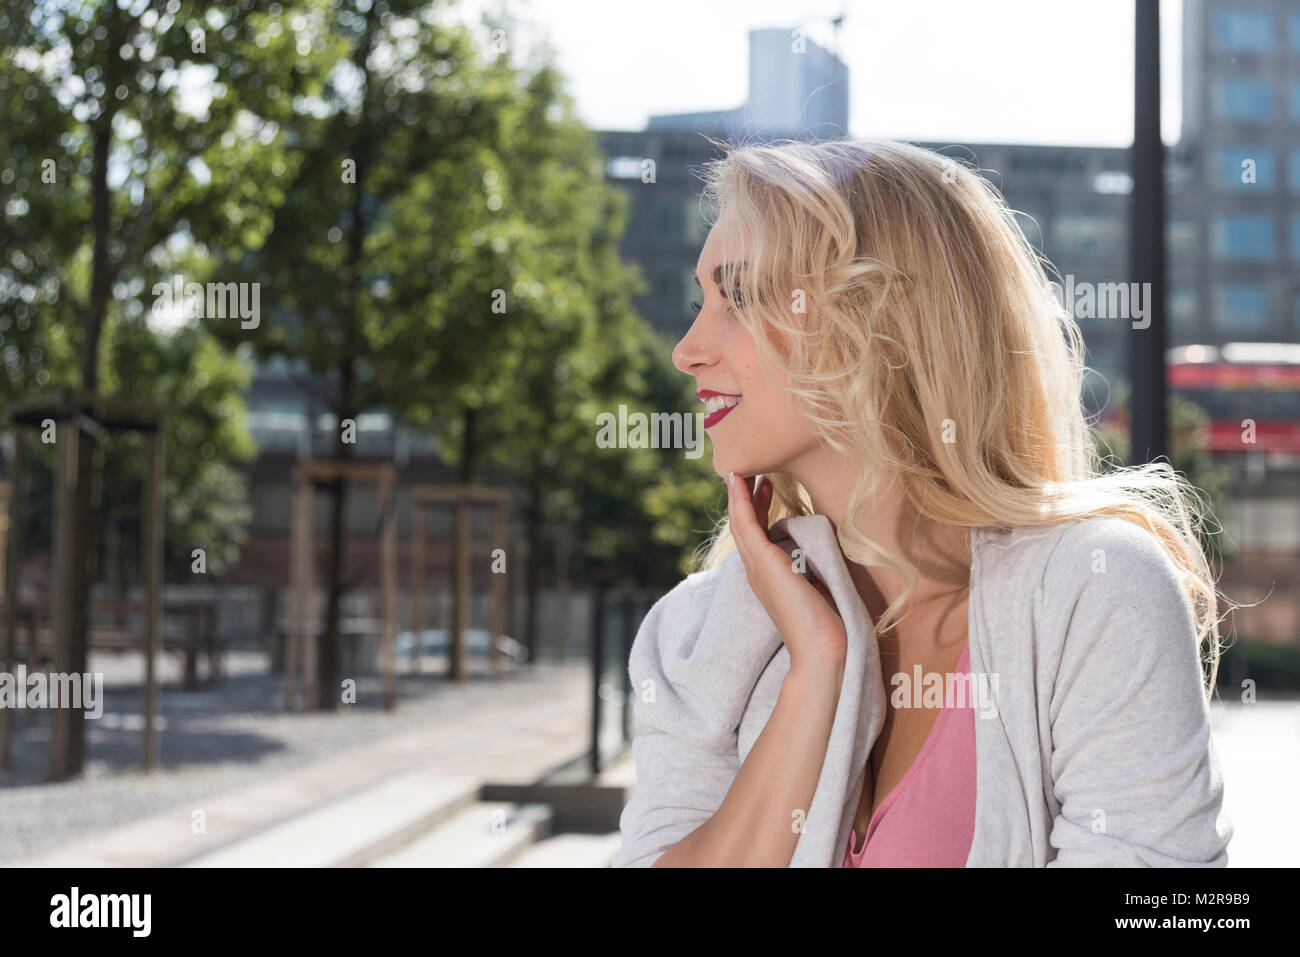 Young woman in the town, smile, portrait, sidewise Stock Photo